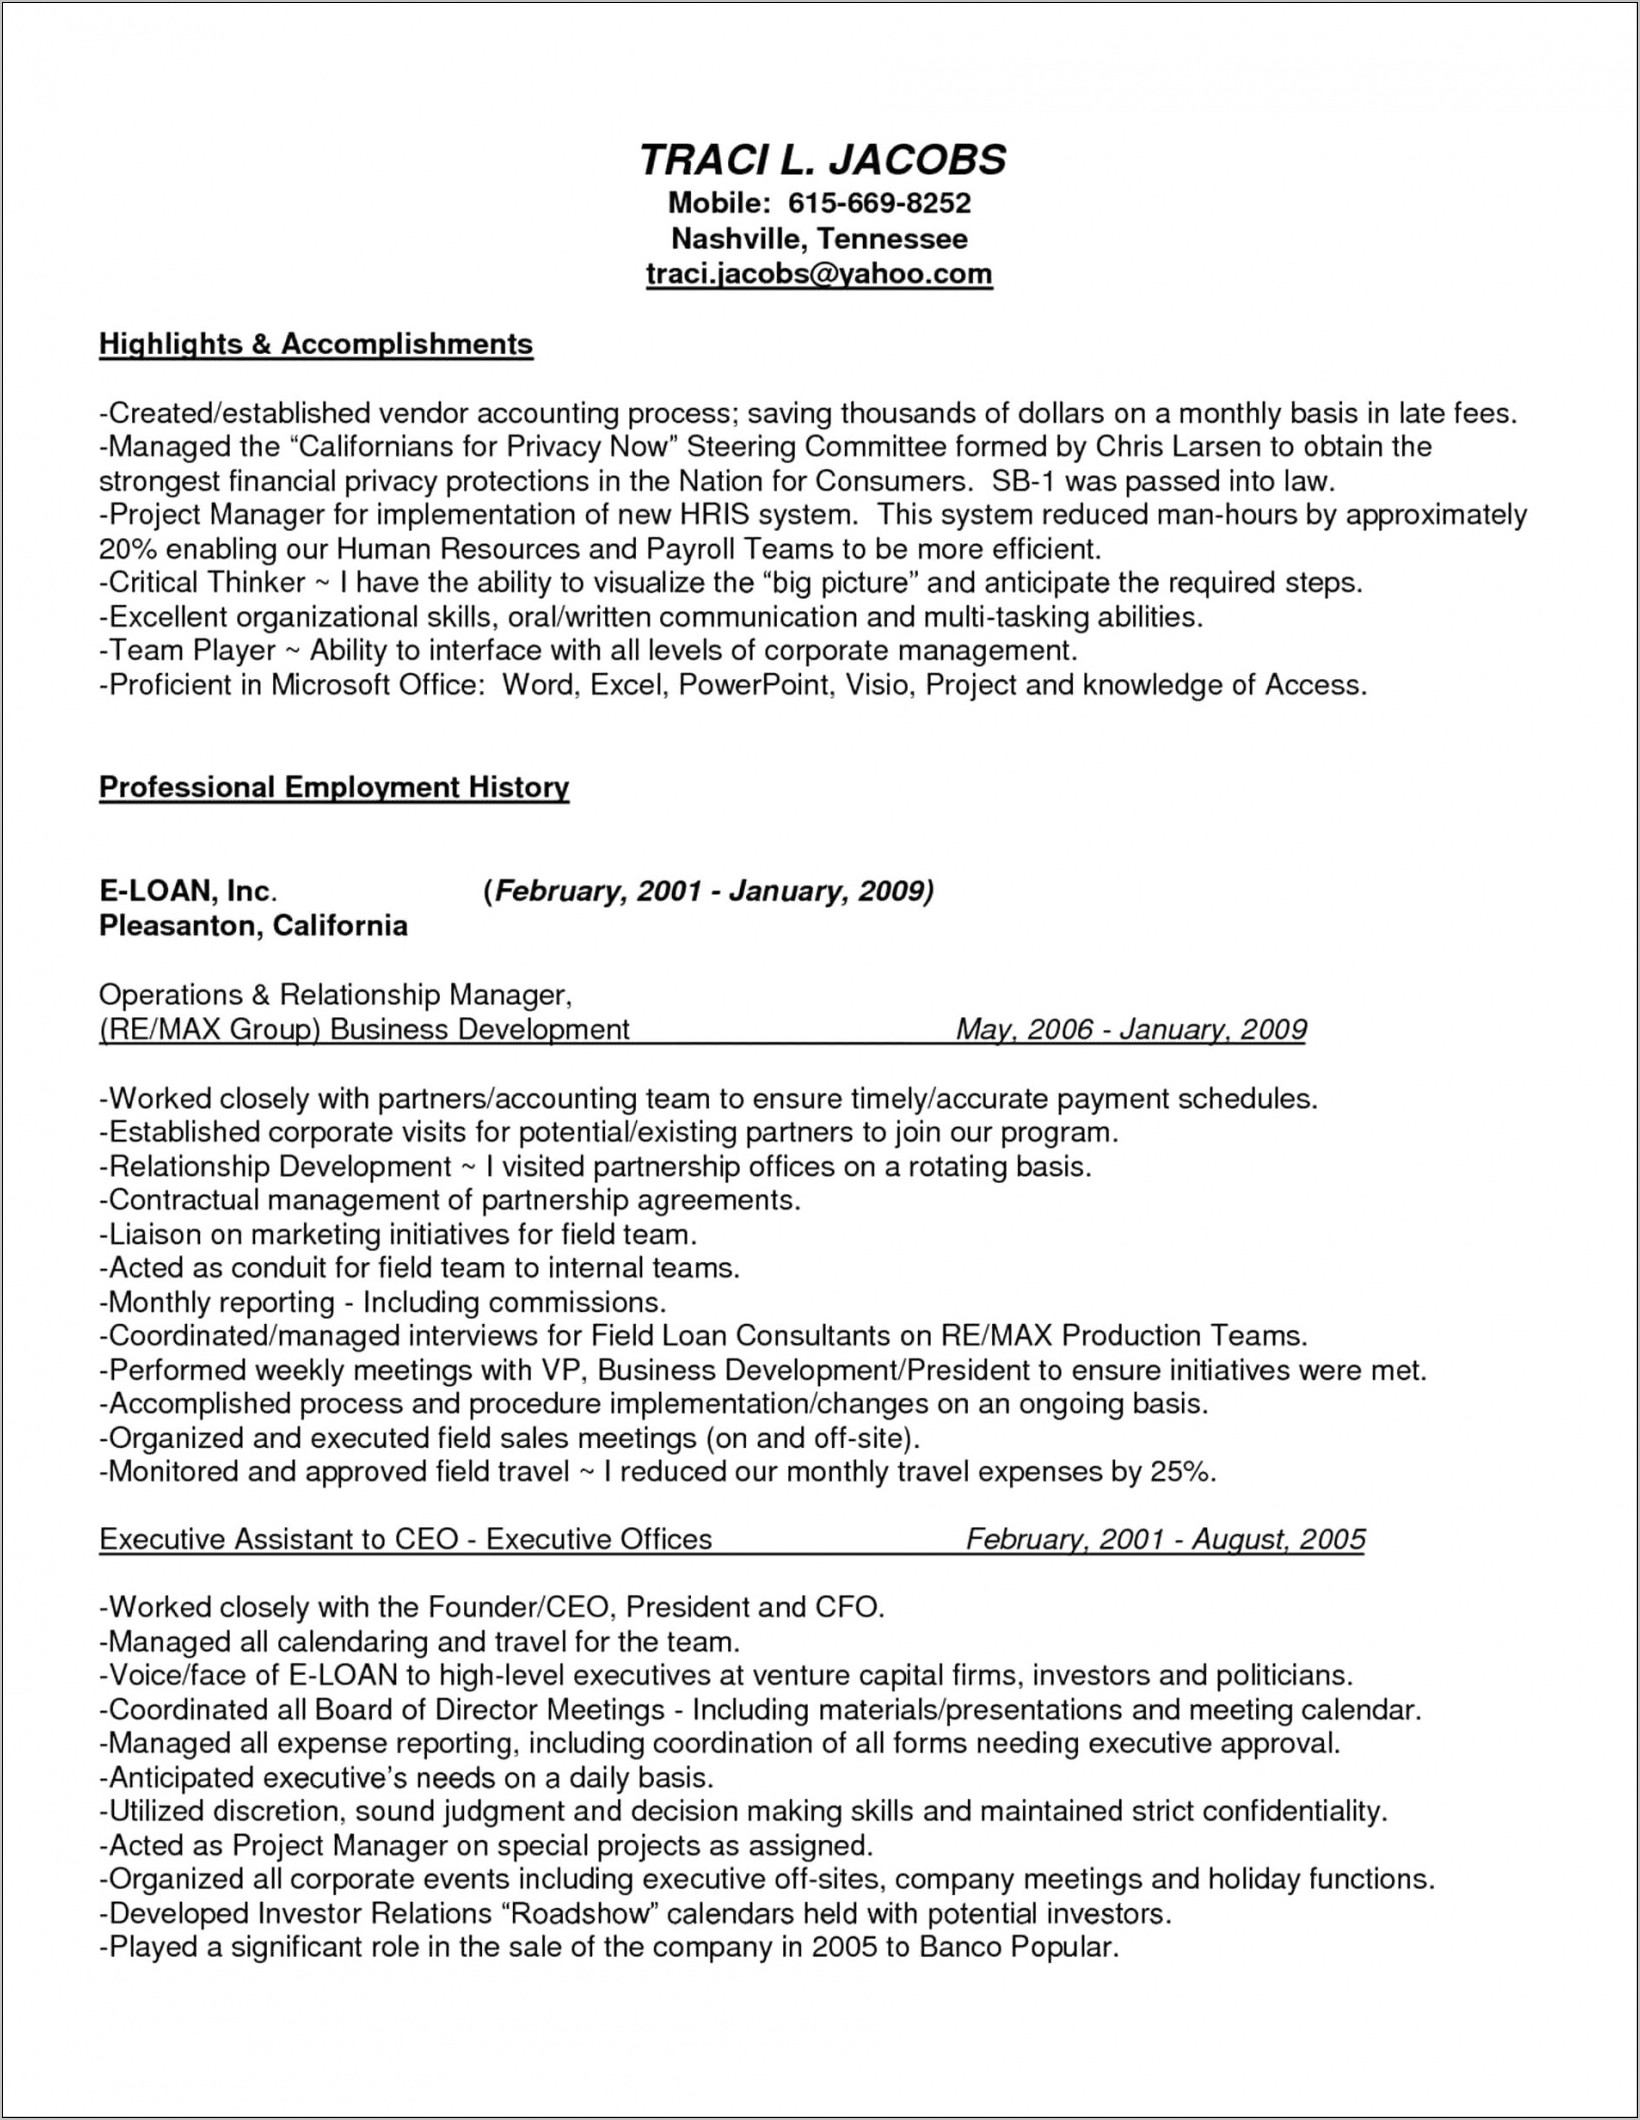 Resume Samples For Executive Assistant To Ceo